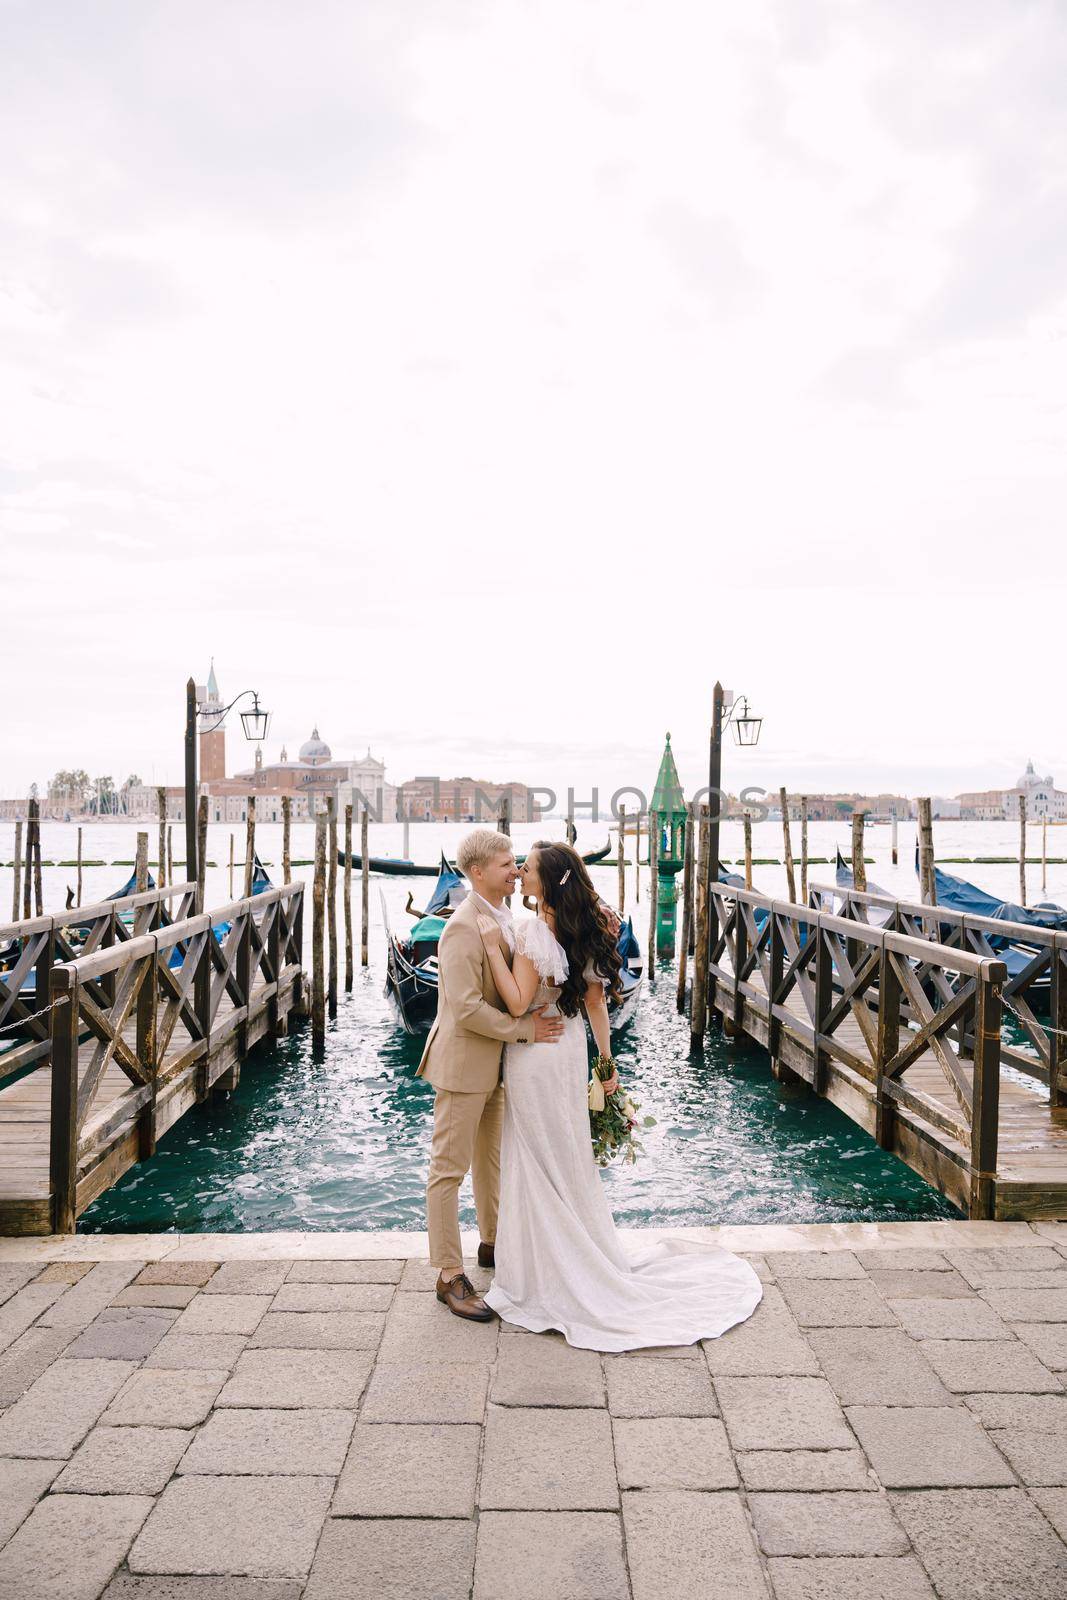 Groom and stand next to the gondola pier, hugging, in Venice, near Piazza San Marco, overlooking San Giorgio Maggiore and the sunset sky. The largest gondola pier in Venice, Italy. by Nadtochiy